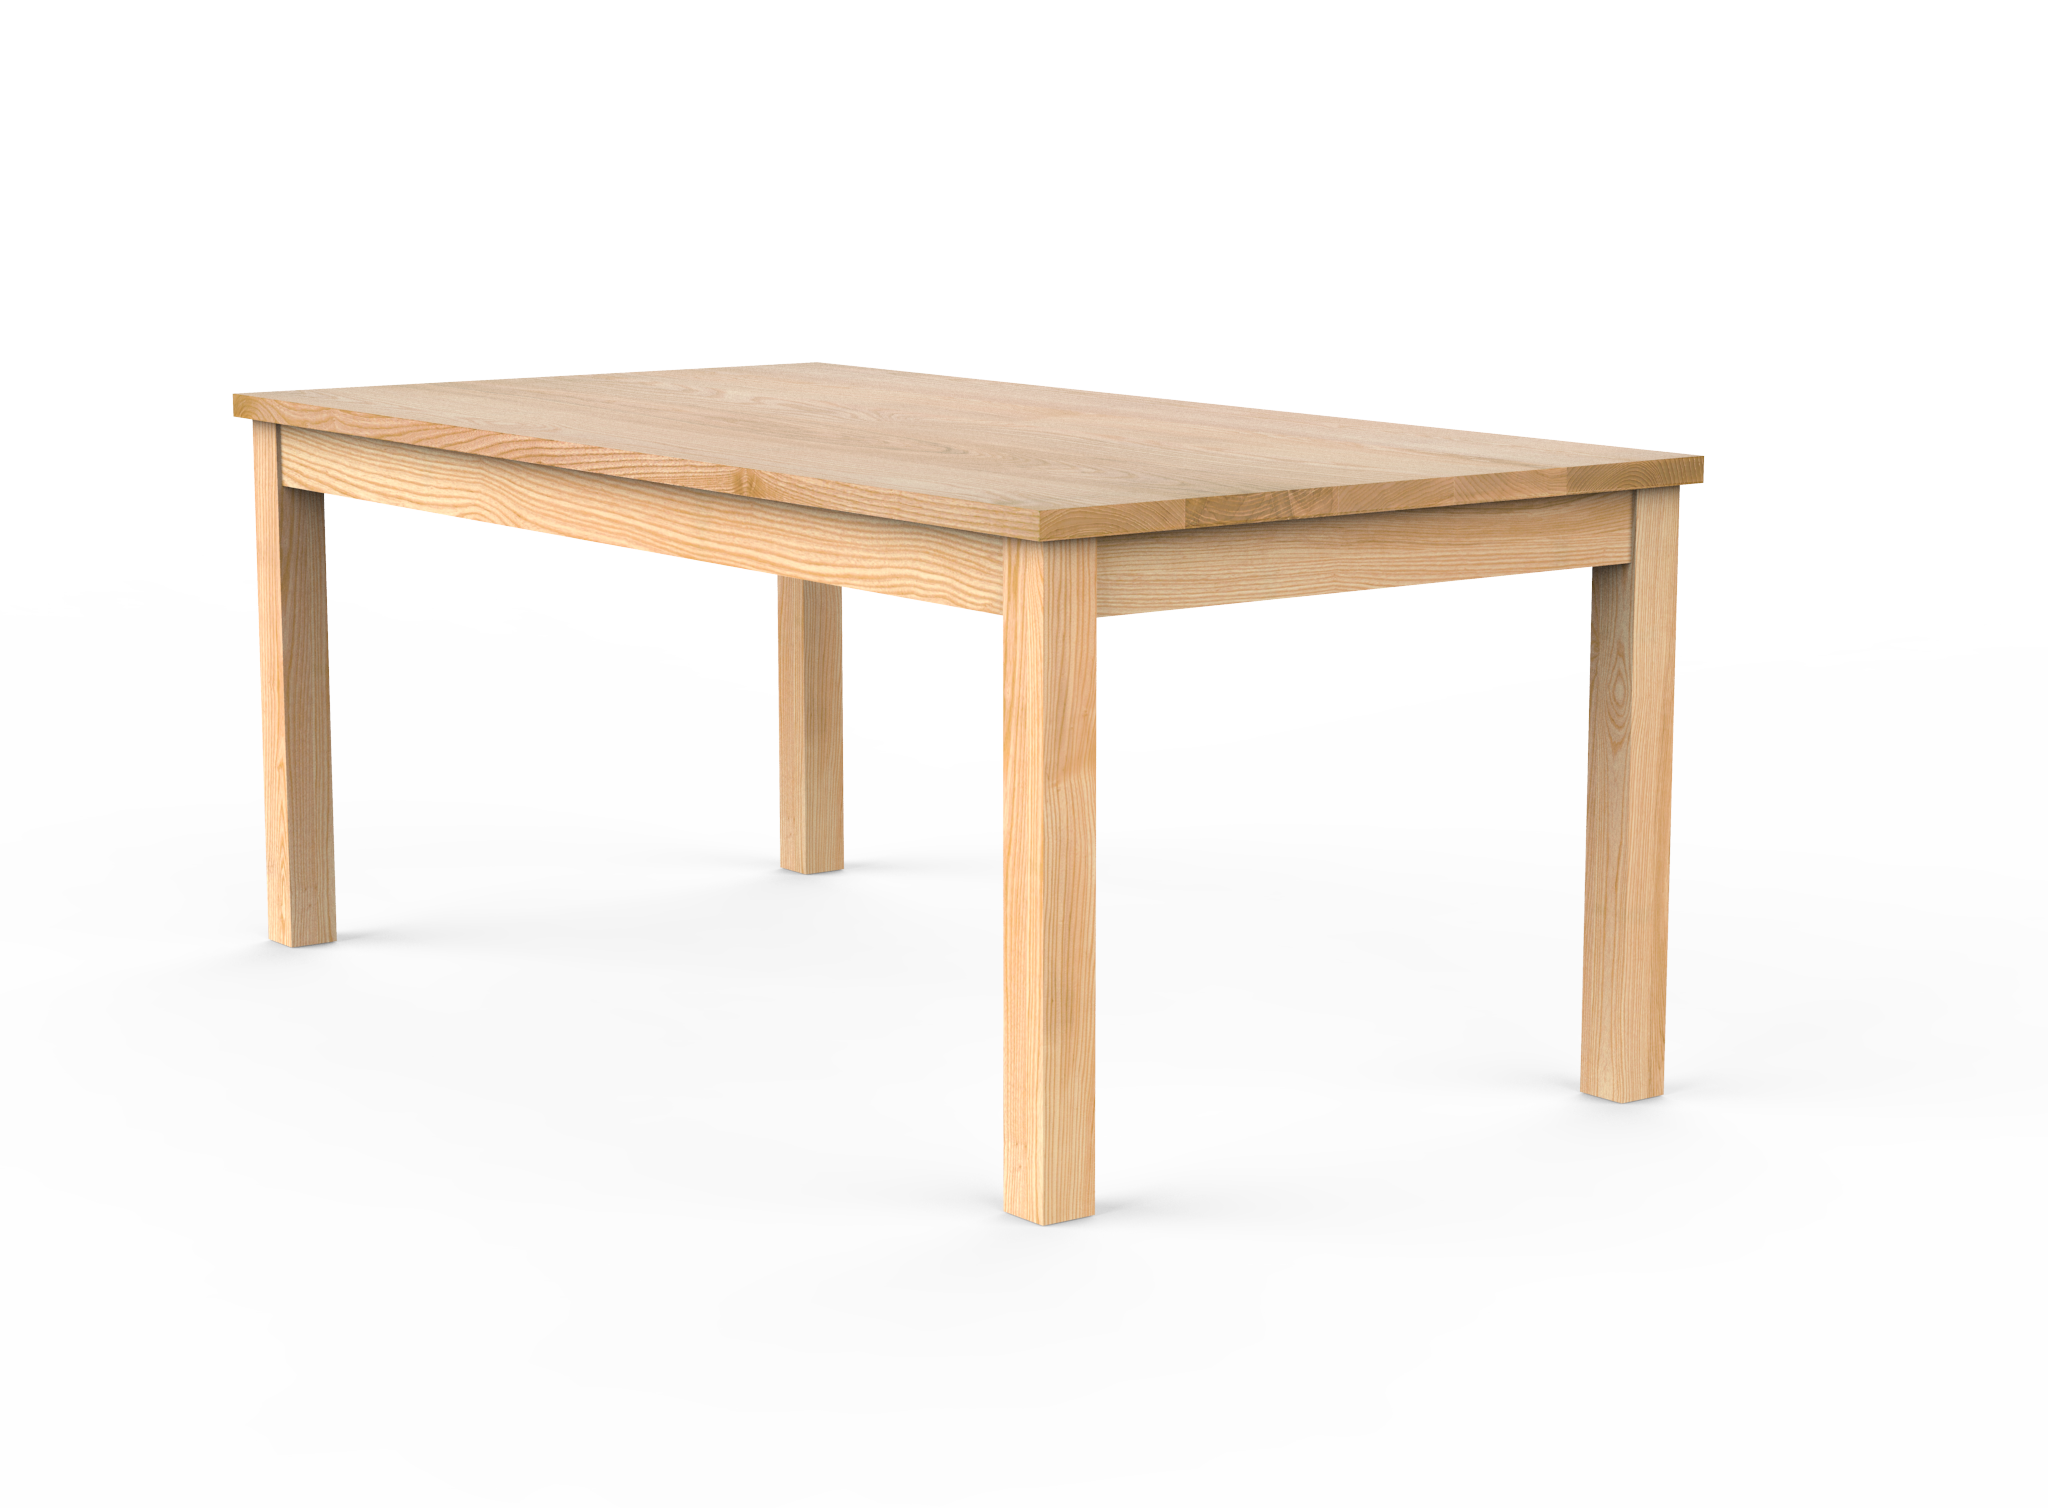 Vermont Farm Table Custom Wood Dining Table Square Wood Ash 